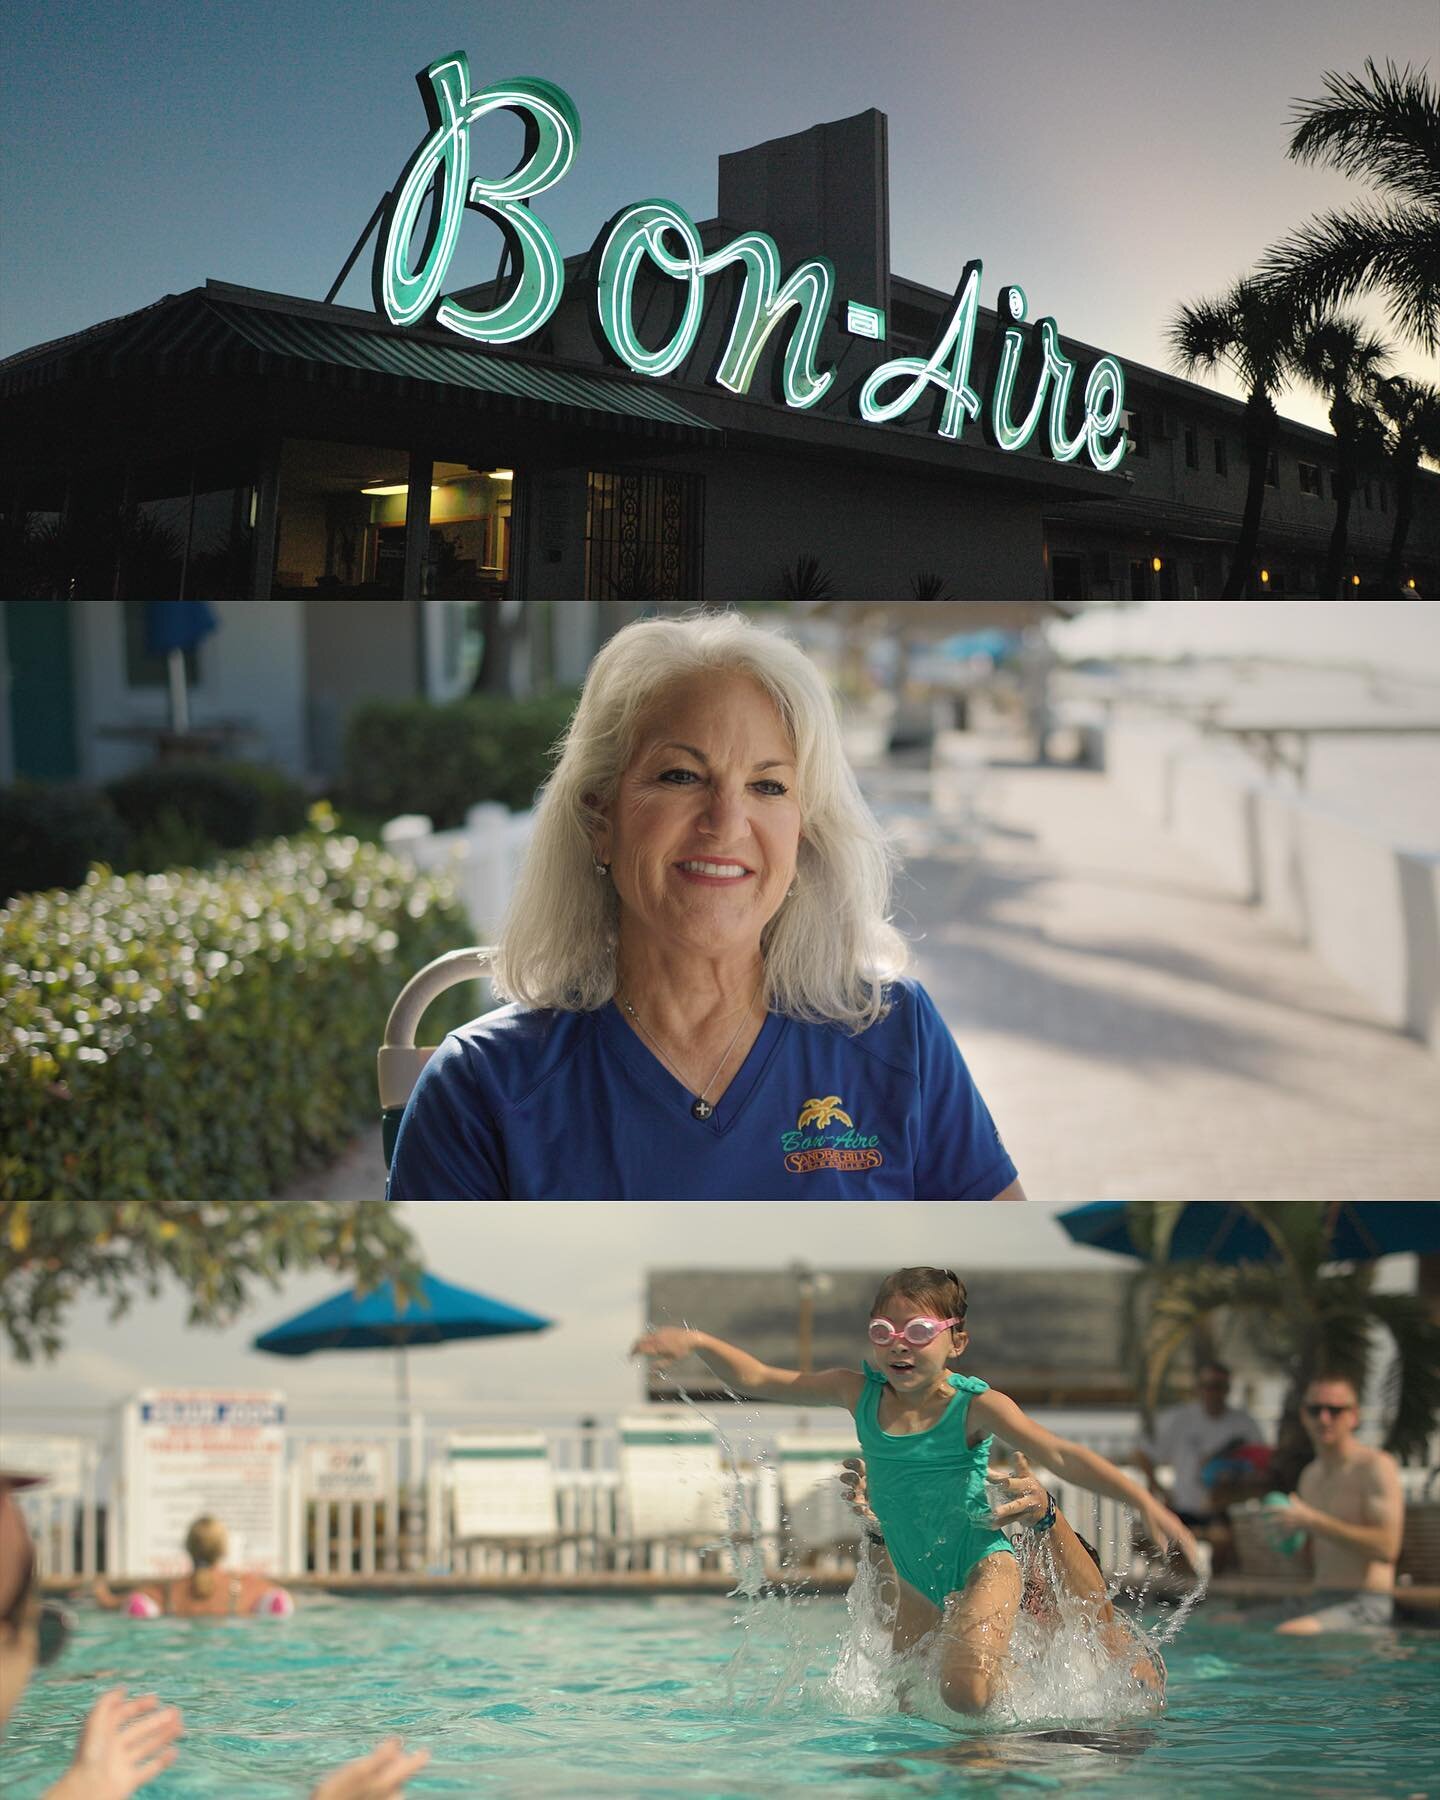 Had a blast working with @bonaireresort 
Check out their Facebook page to see the full video!

#stpetebeach #bonaire #stpeterising #stpetersburg #theburg #floridaliving #videoshoot